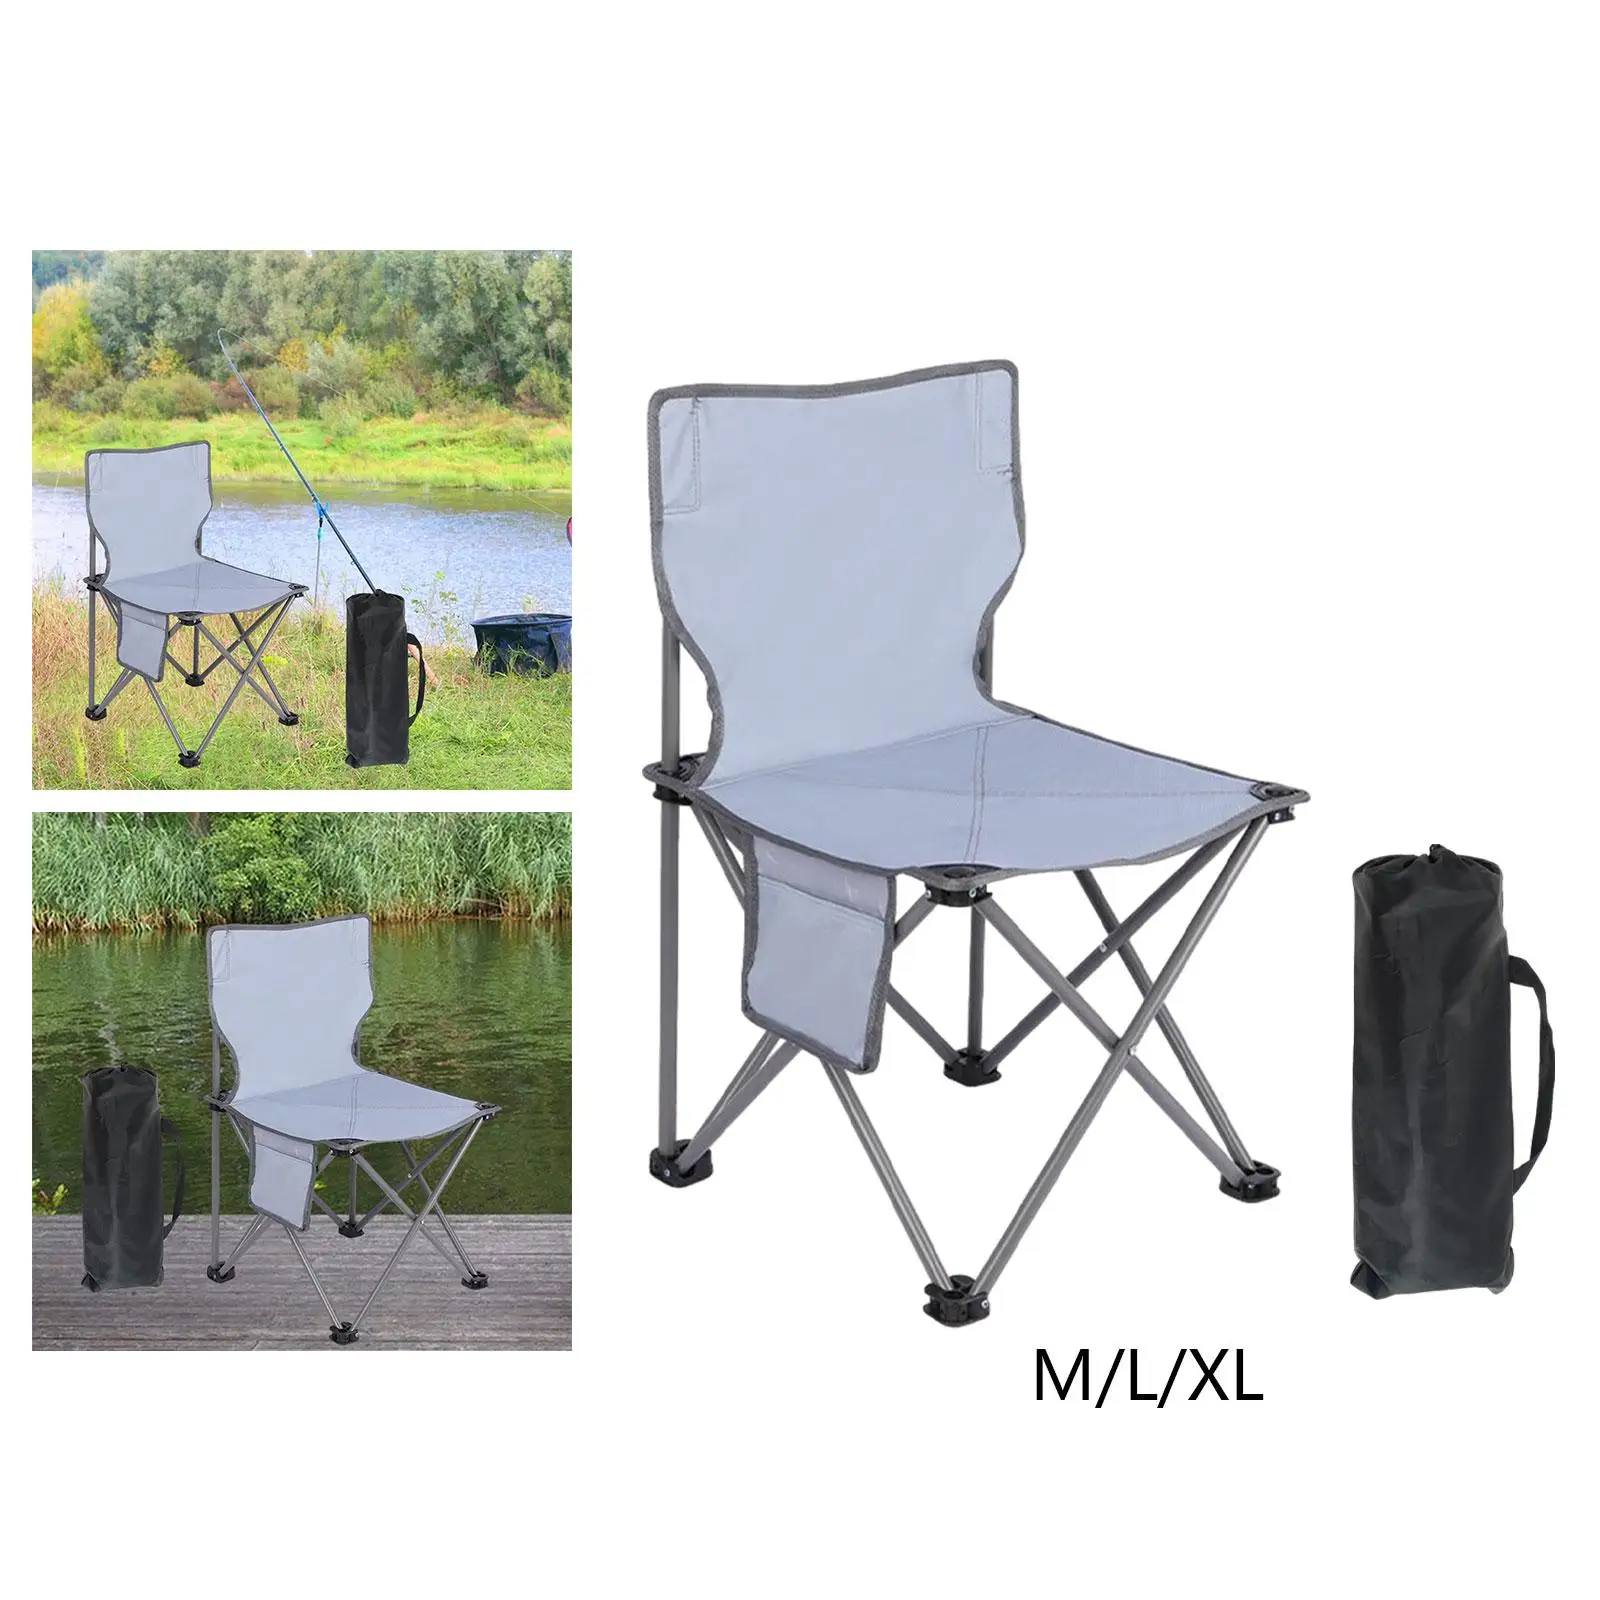 Portable Camping Chair Outdoor Furniture with Side Pocket Heavy Duty Collapsible Chair for Park Concert Backpacking Beach Garden